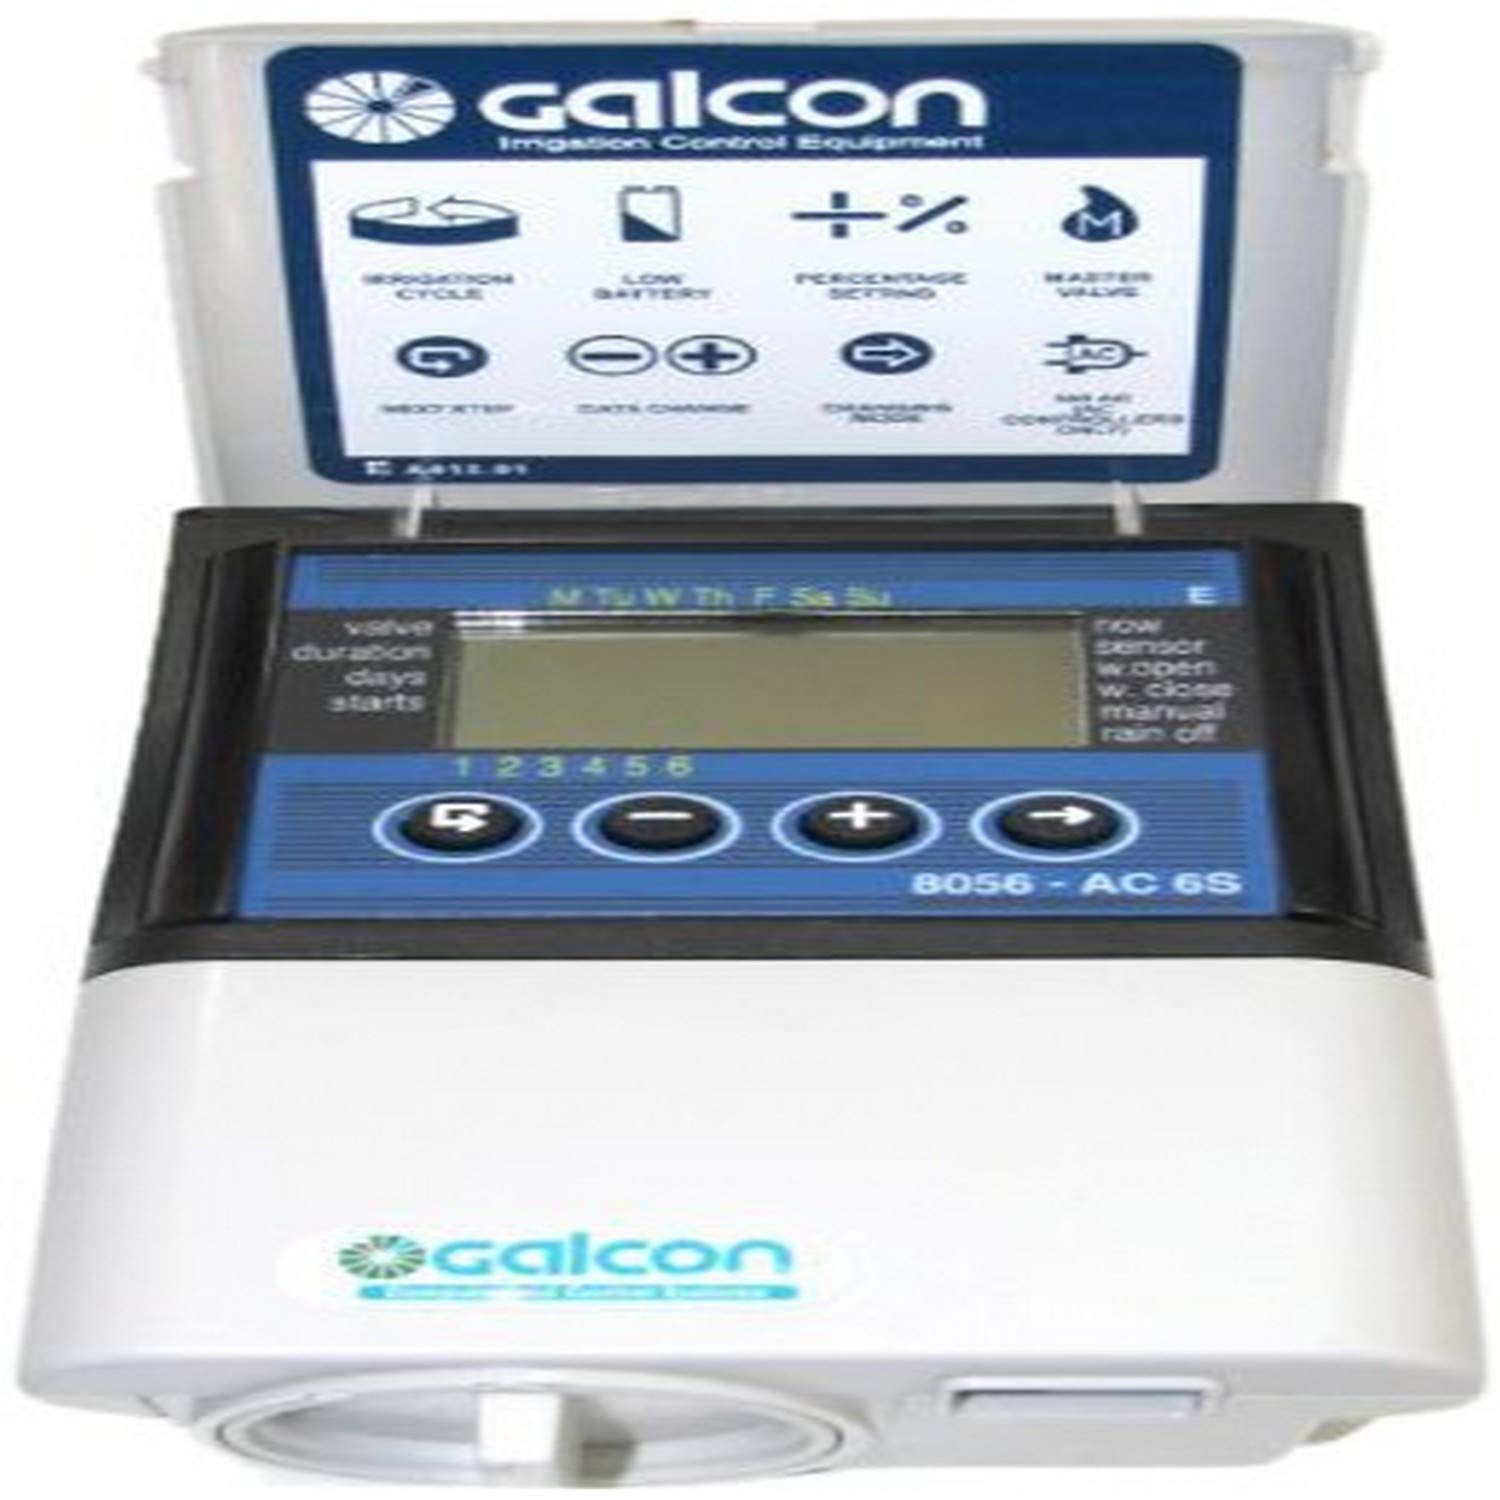 Galcon 8054 AC-4S